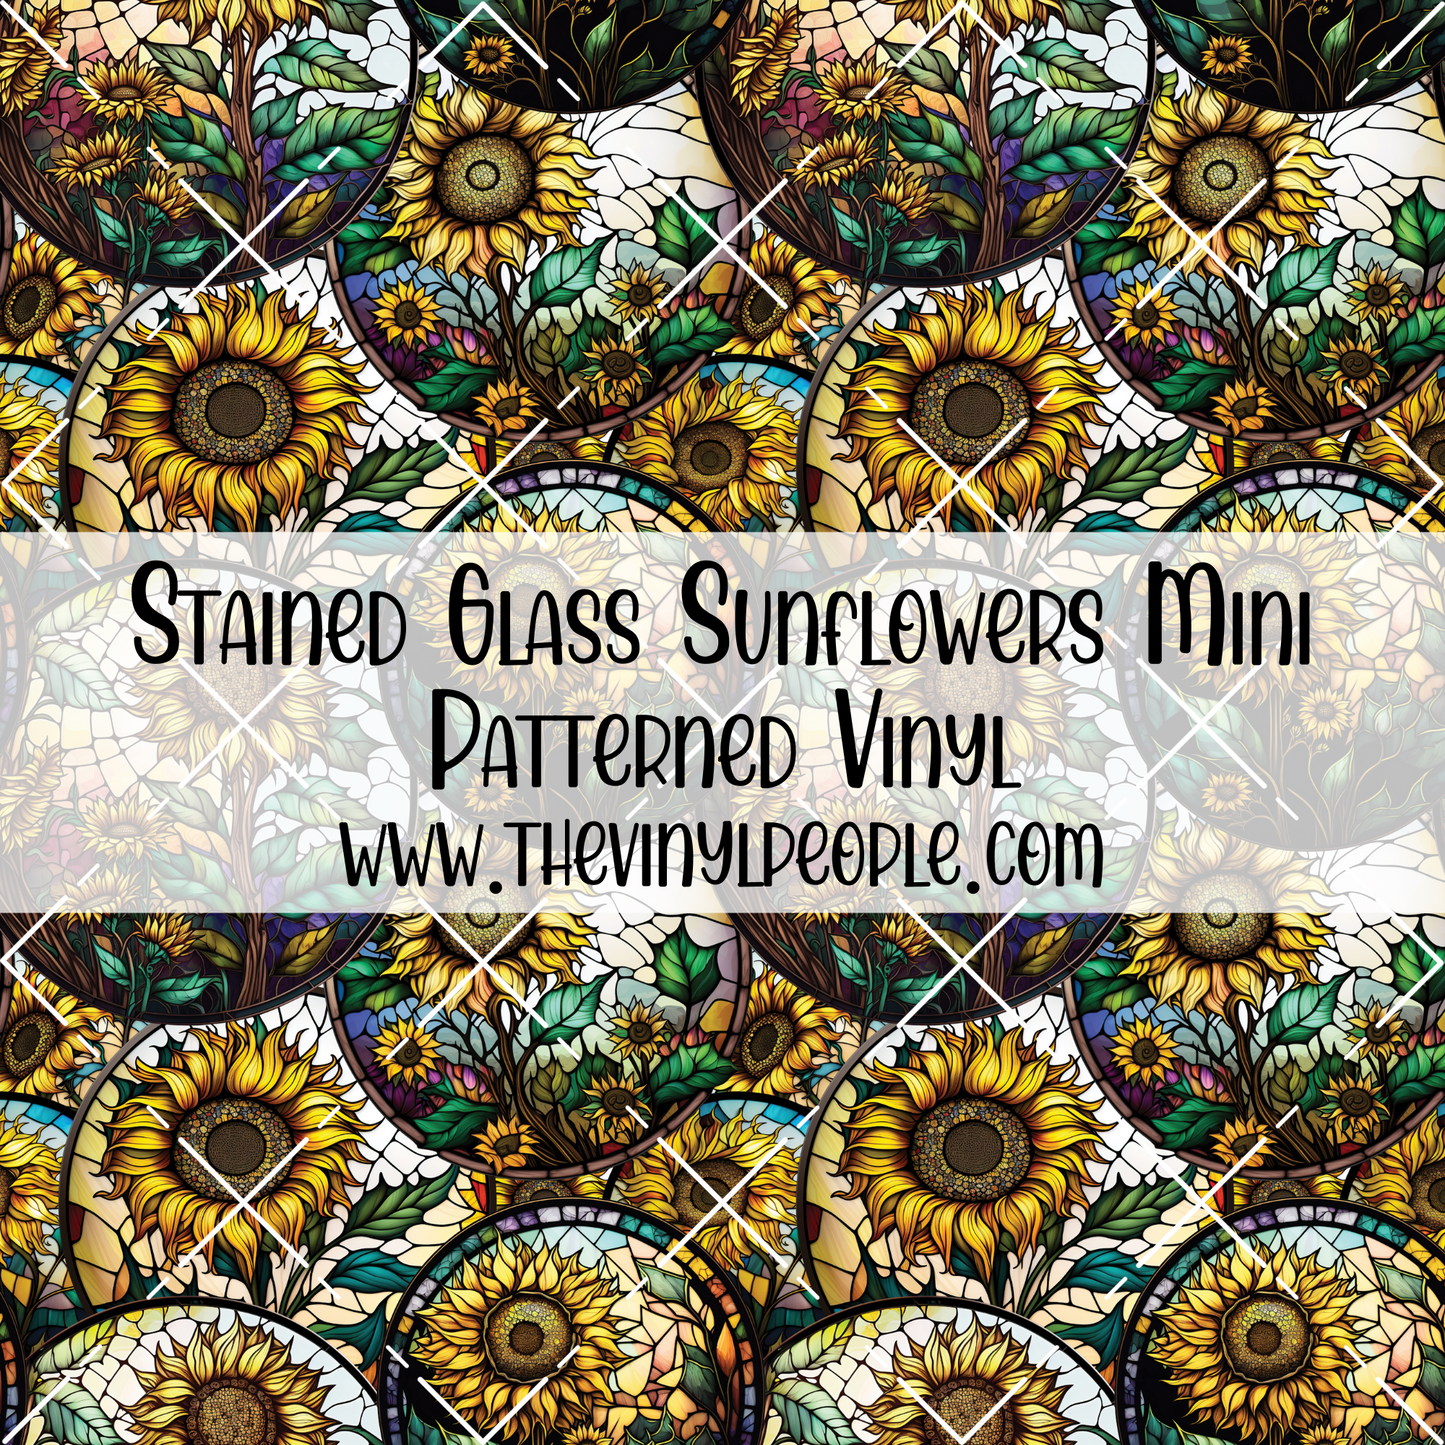 Stained Glass Sunflowers Patterned Vinyl